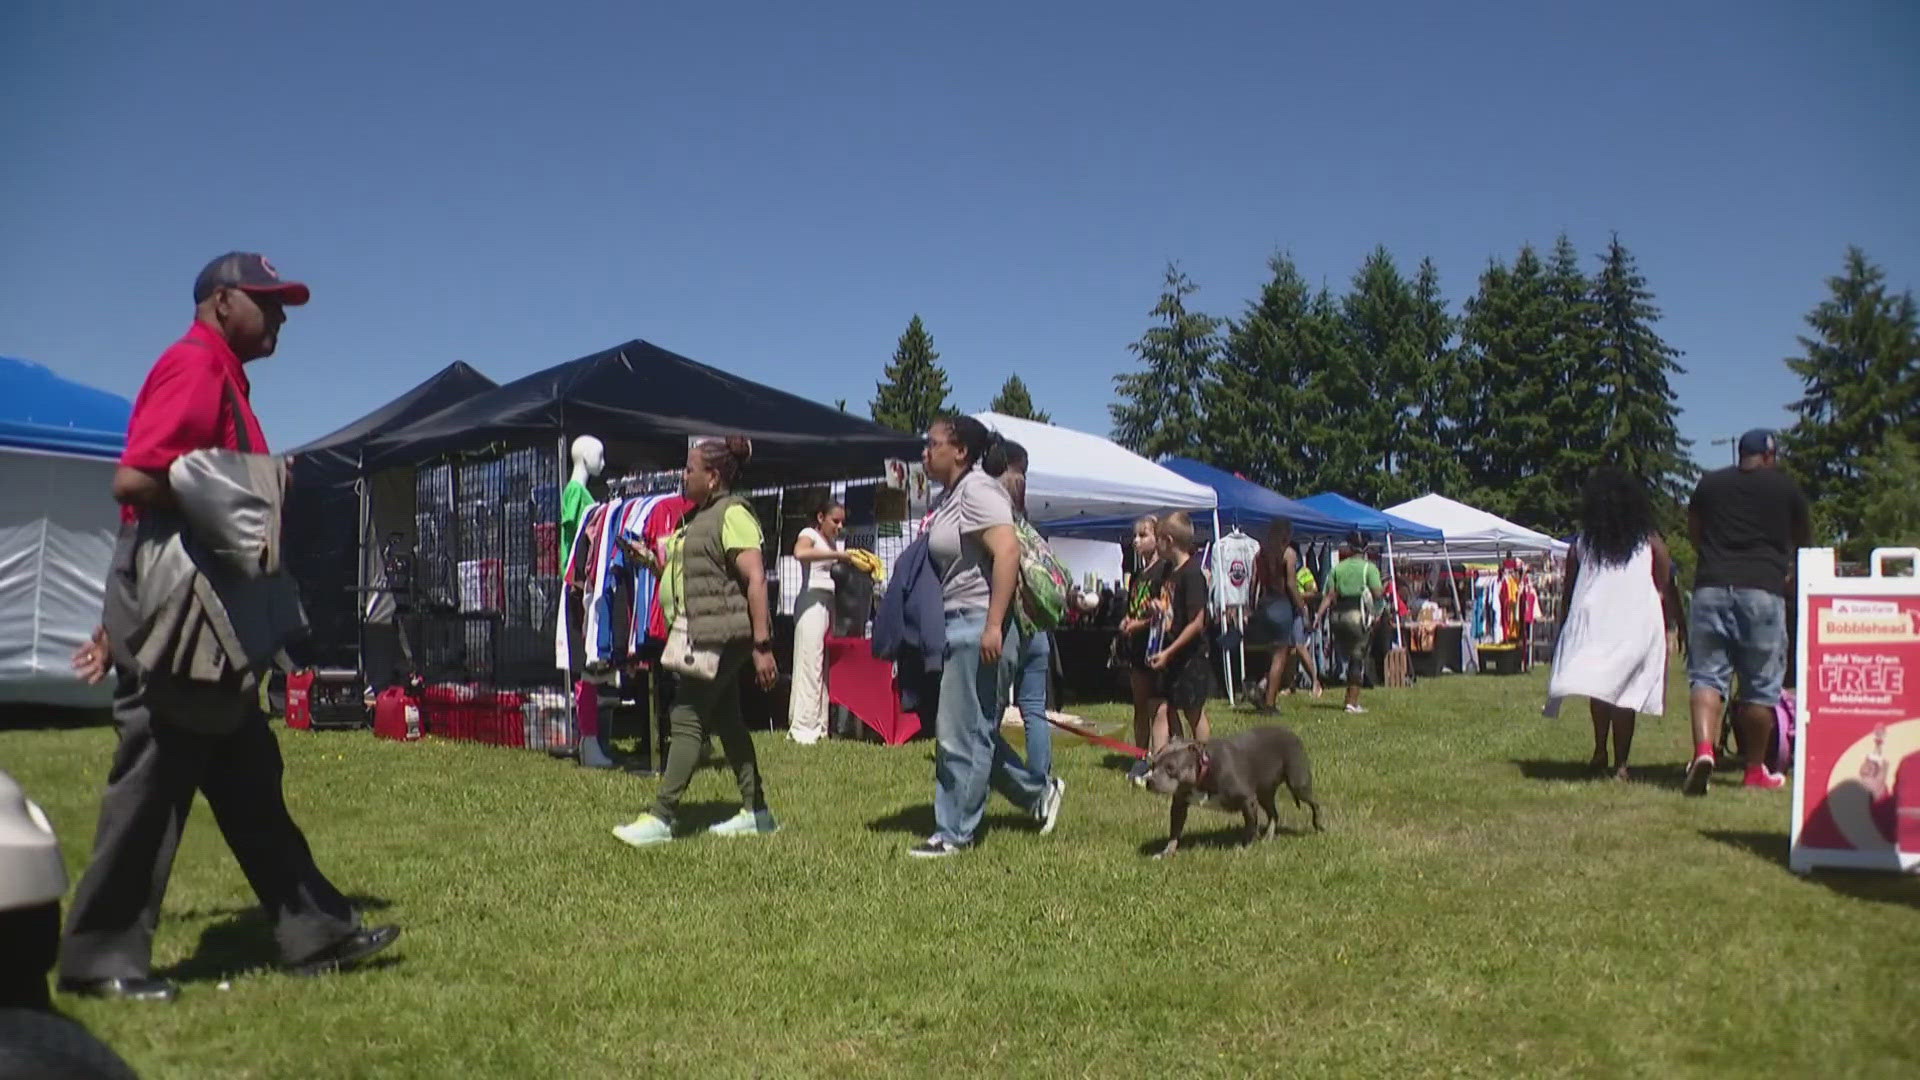 Tacoma is home to Washington State's biggest Juneteenth celebration.